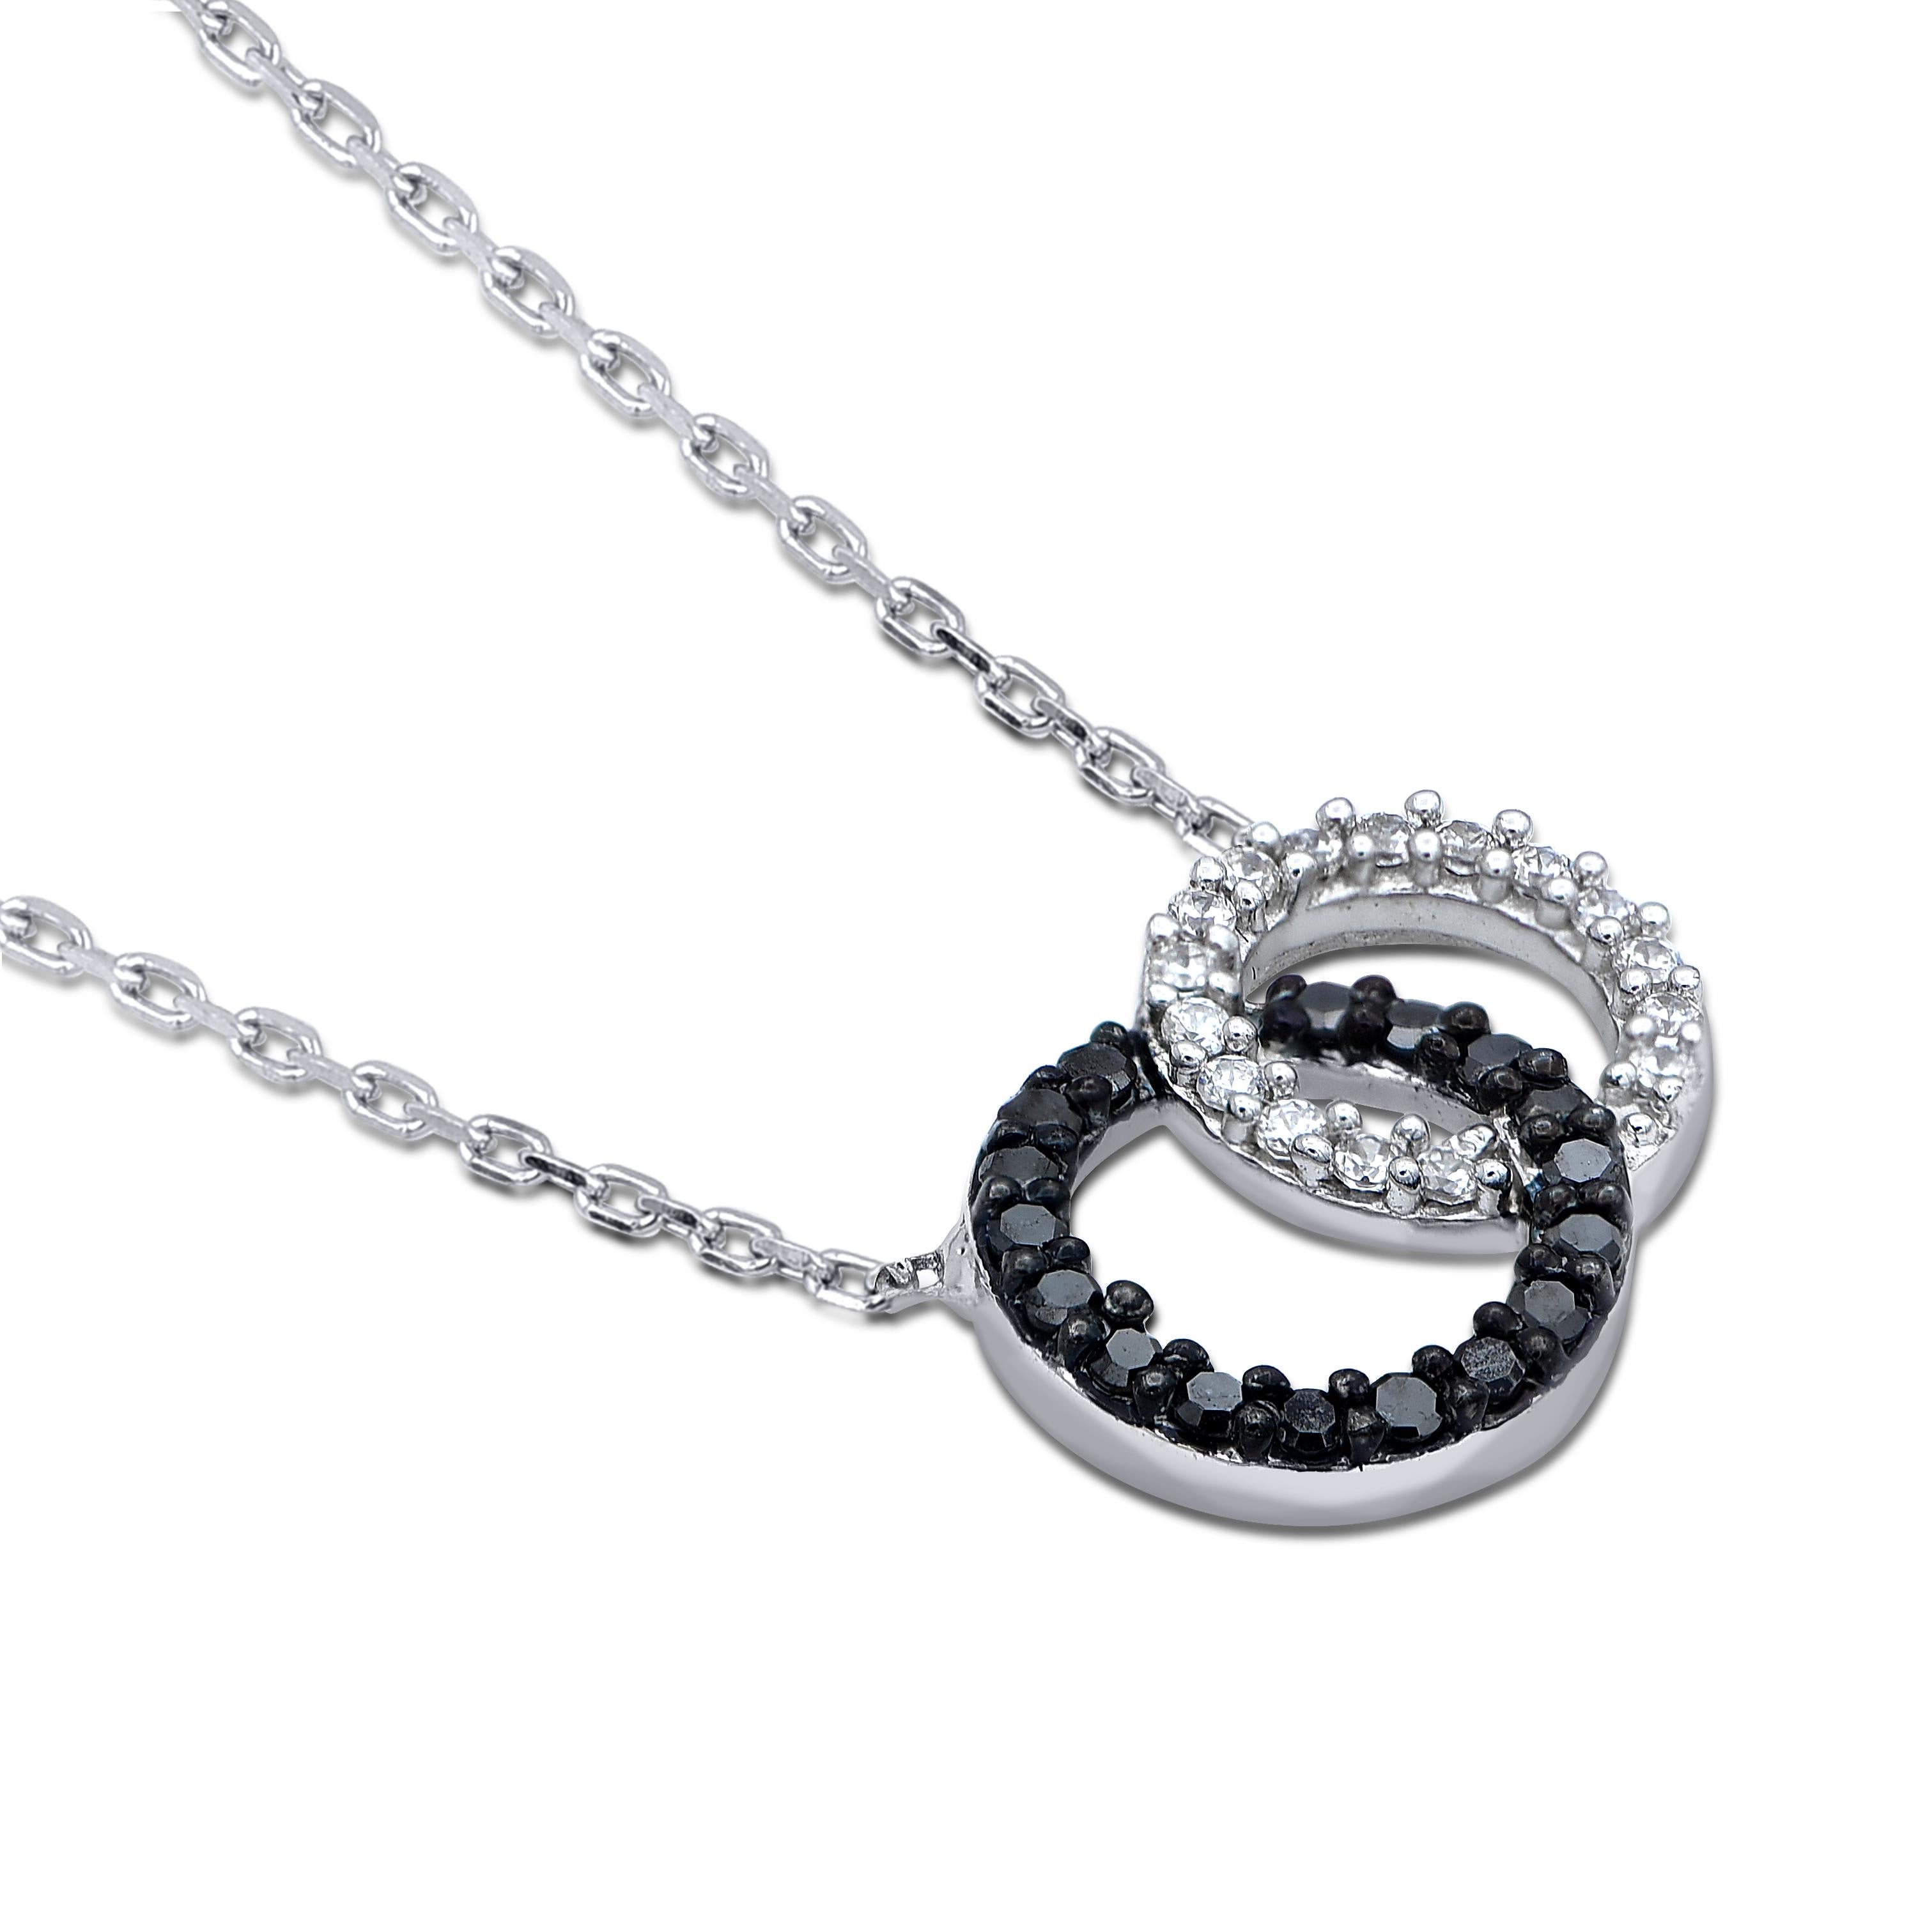 A striking addition when worn on its own, this diamond pendant makes a stunning impression. This circle pendant is crafted from 14-karat white gold and features 33 single cut & black treated diamonds set in prong setting. H-I color I-2 clarity and a